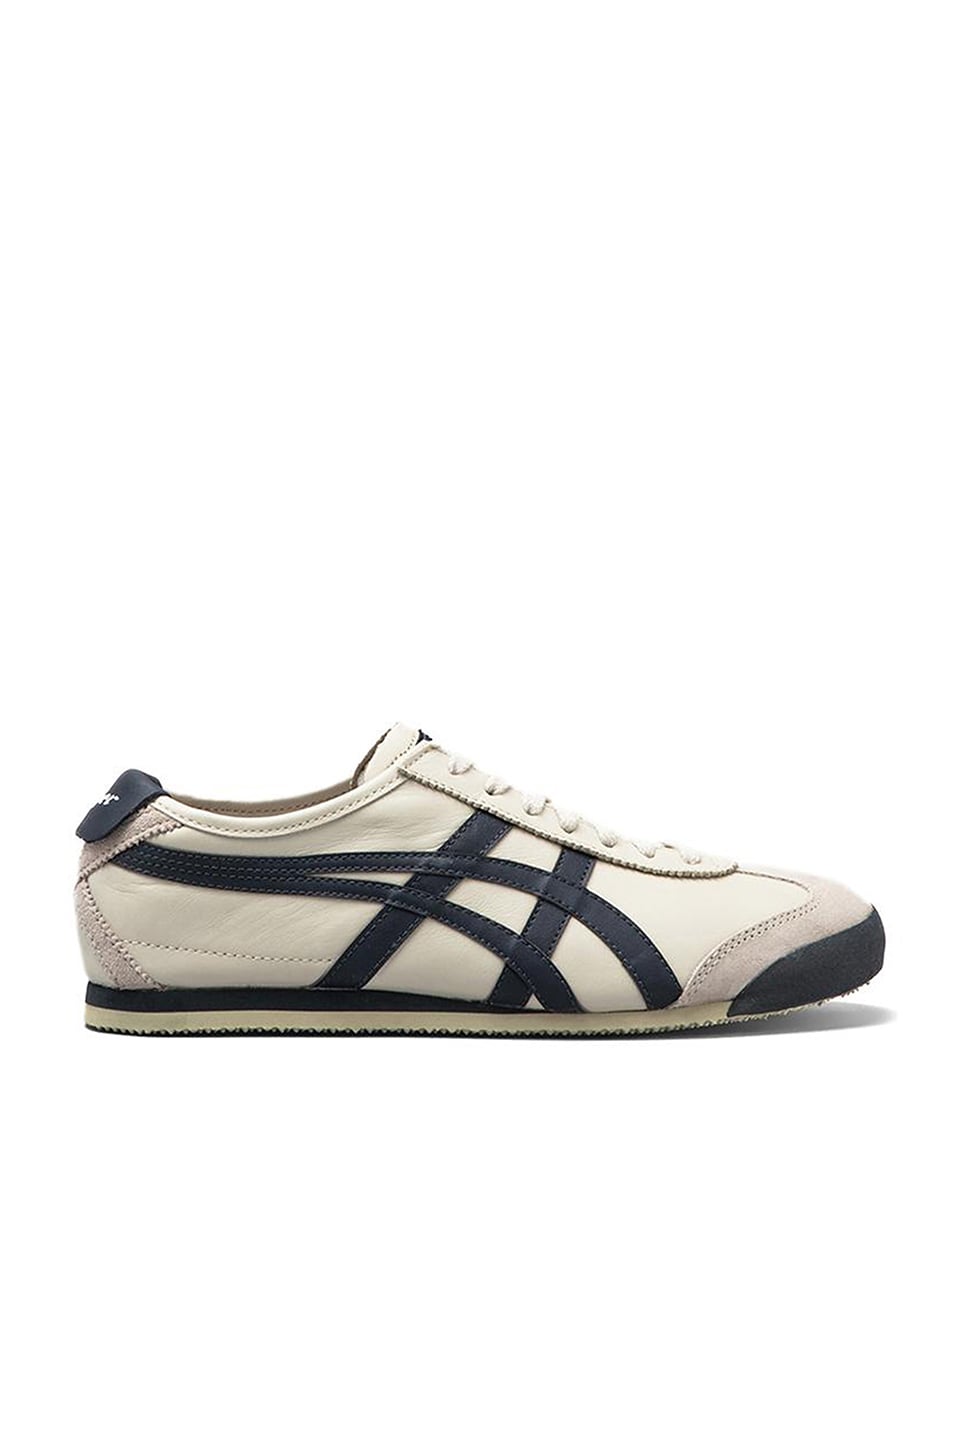 asics shoes online shopping in india